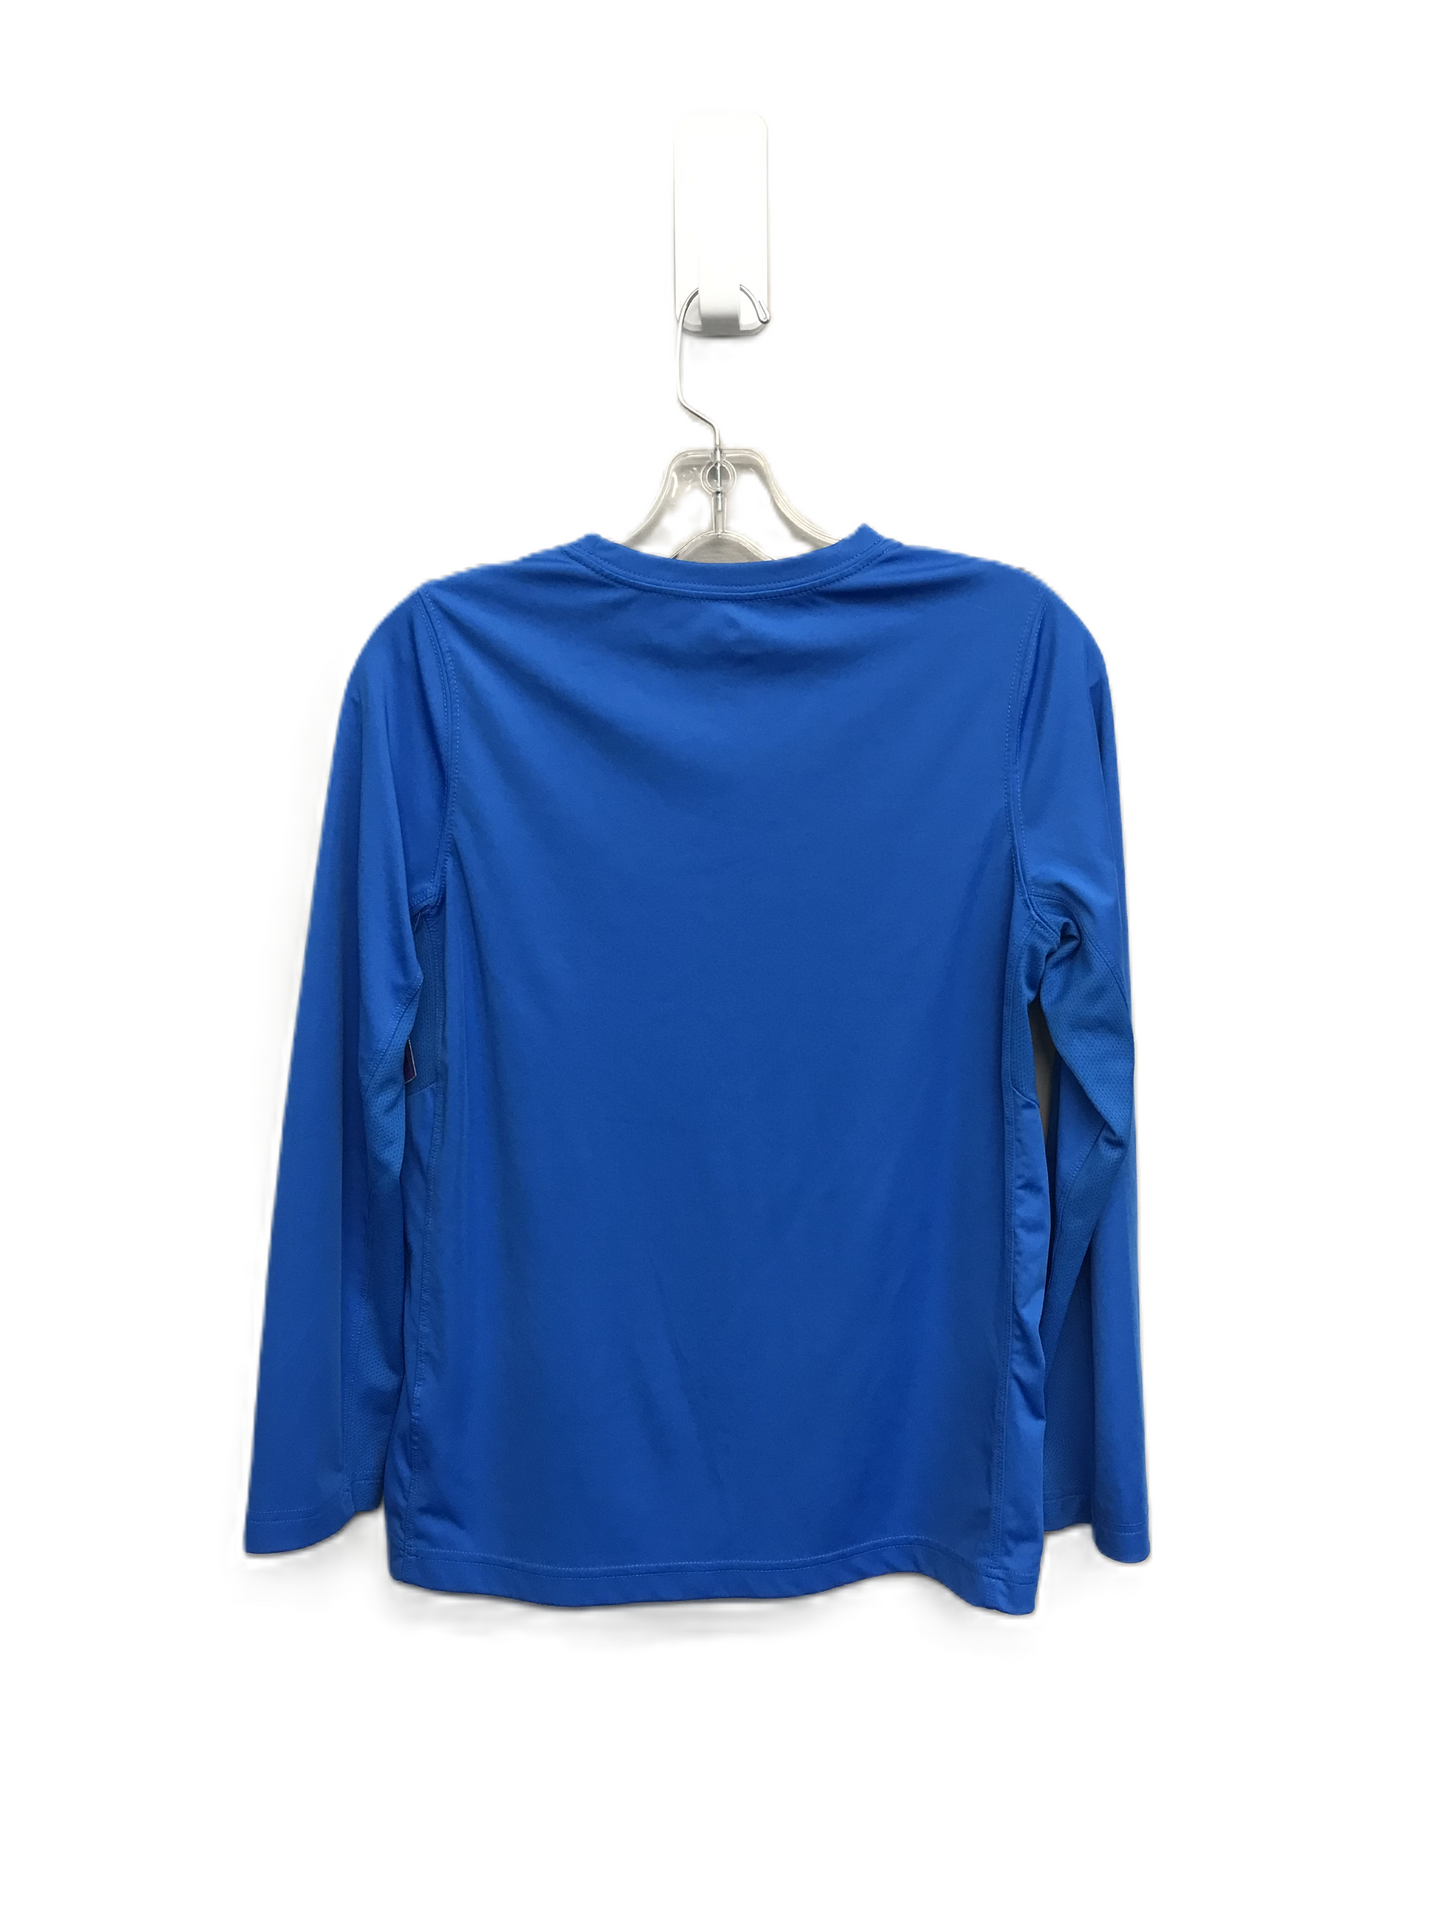 Blue Athletic Top Long Sleeve Crewneck By Nike Apparel, Size: L